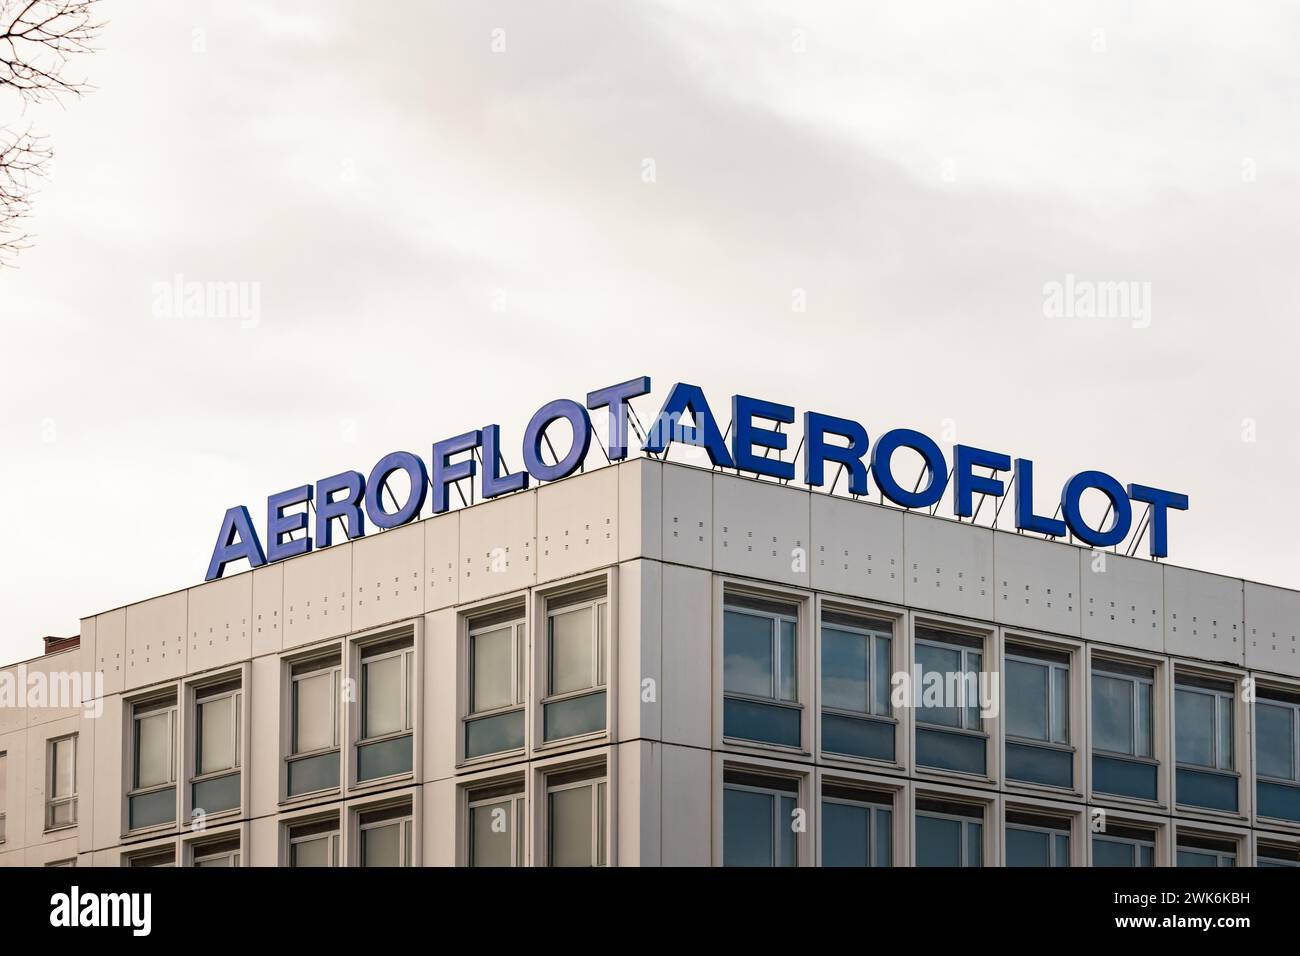 Aeroflot Russian airline logo sign on a building rooftop in Berlin. Advertisement for the aviation company. International transportation business. Stock Photo